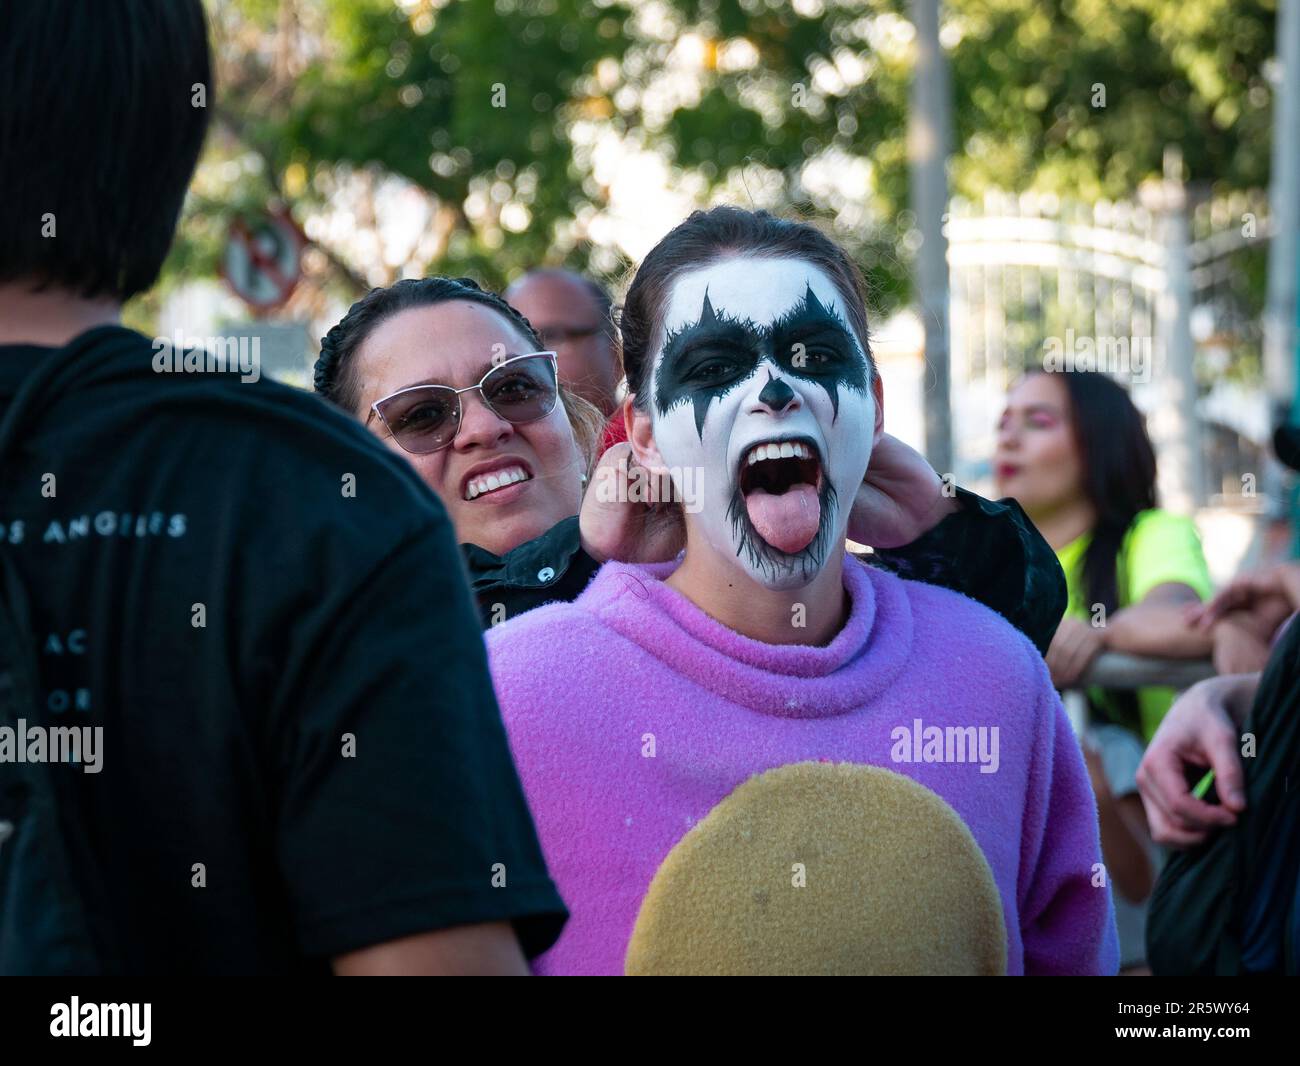 Barranquilla, Atlantico, Colombia - February 21 2023: Young Colombian Woman with White Face Paint and Black Eyes is Wearing a Purple Costume at Carniv Stock Photo